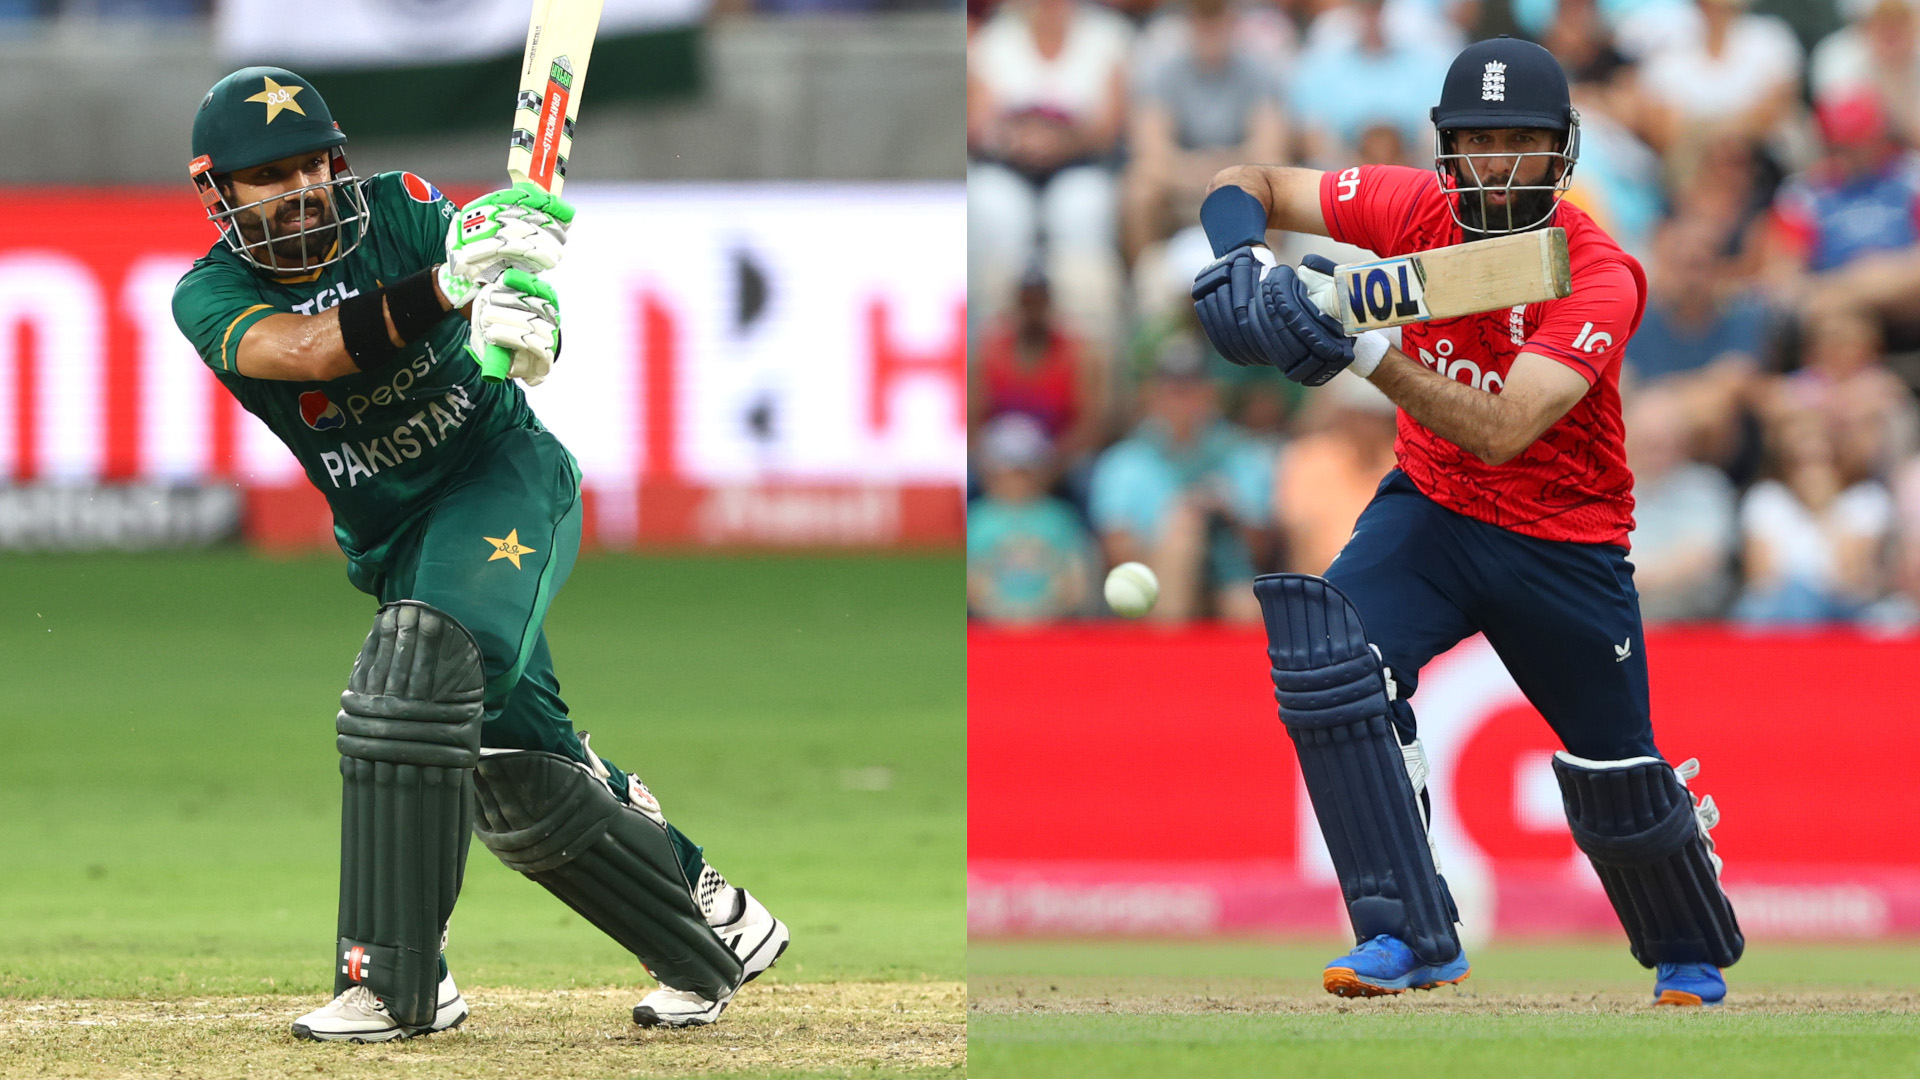 Pakistan vs England live stream how to watch 2nd T20i cricket online from anywhere now TechRadar